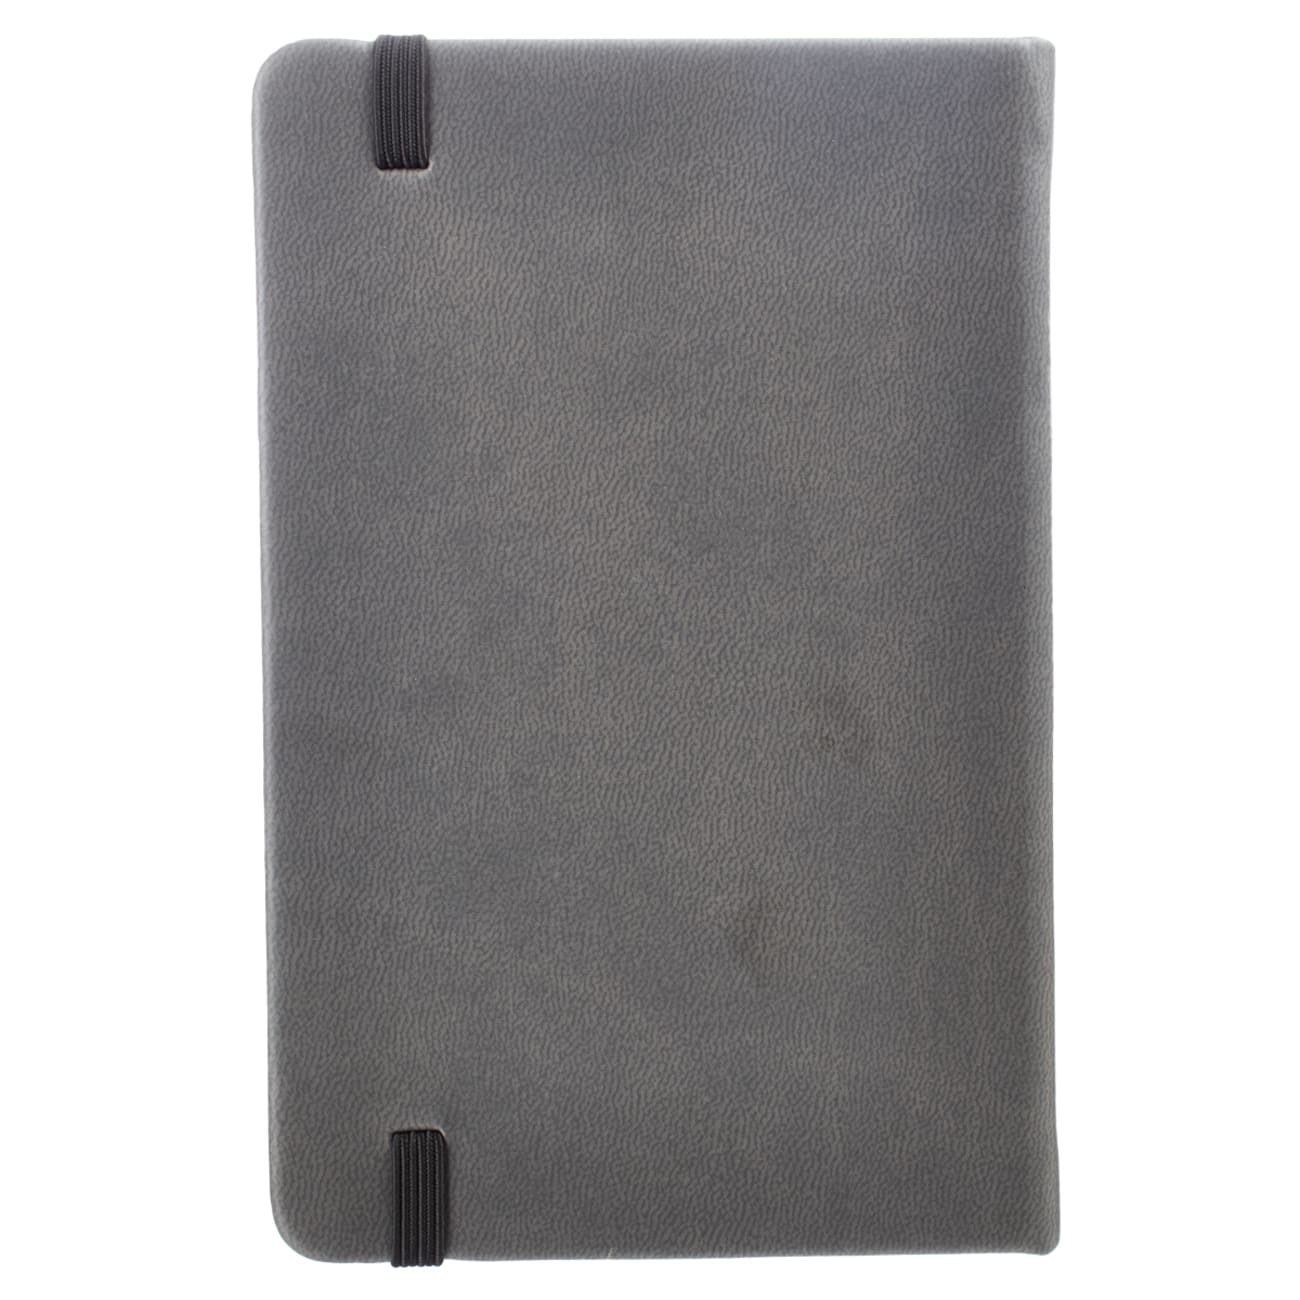 Notebook: Be Strong and Courageous With Elastic Band Closure Gray Imitation Leather Over Hardback